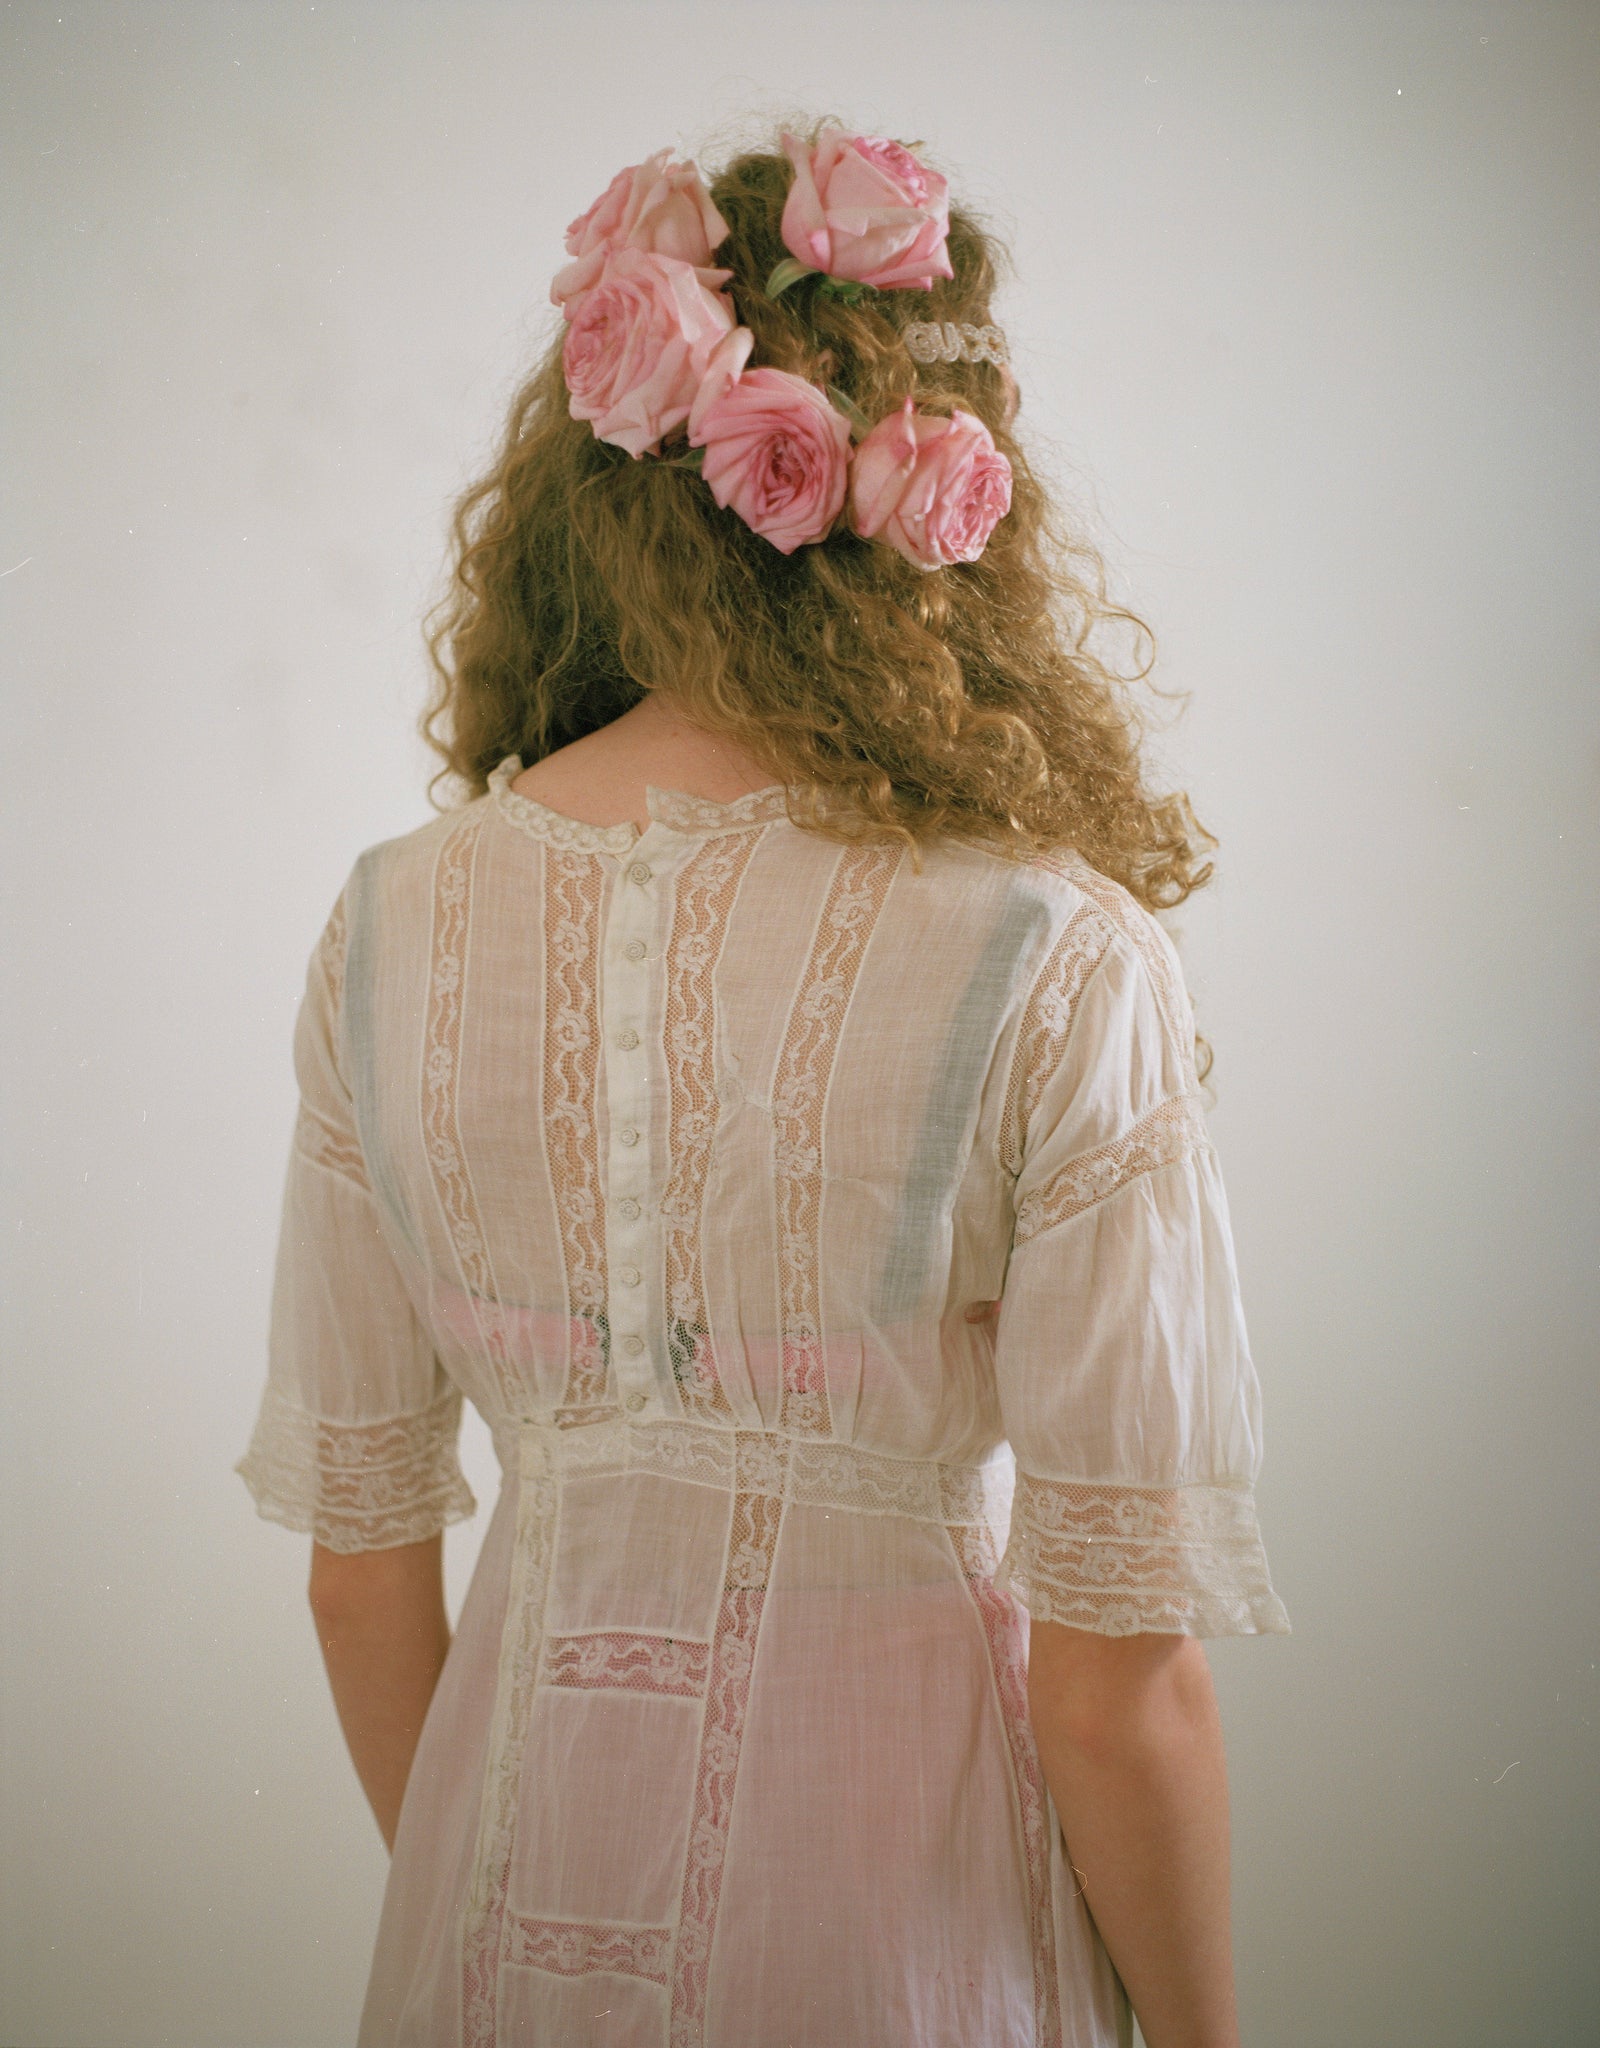 1910s lace embroidered lawn dress